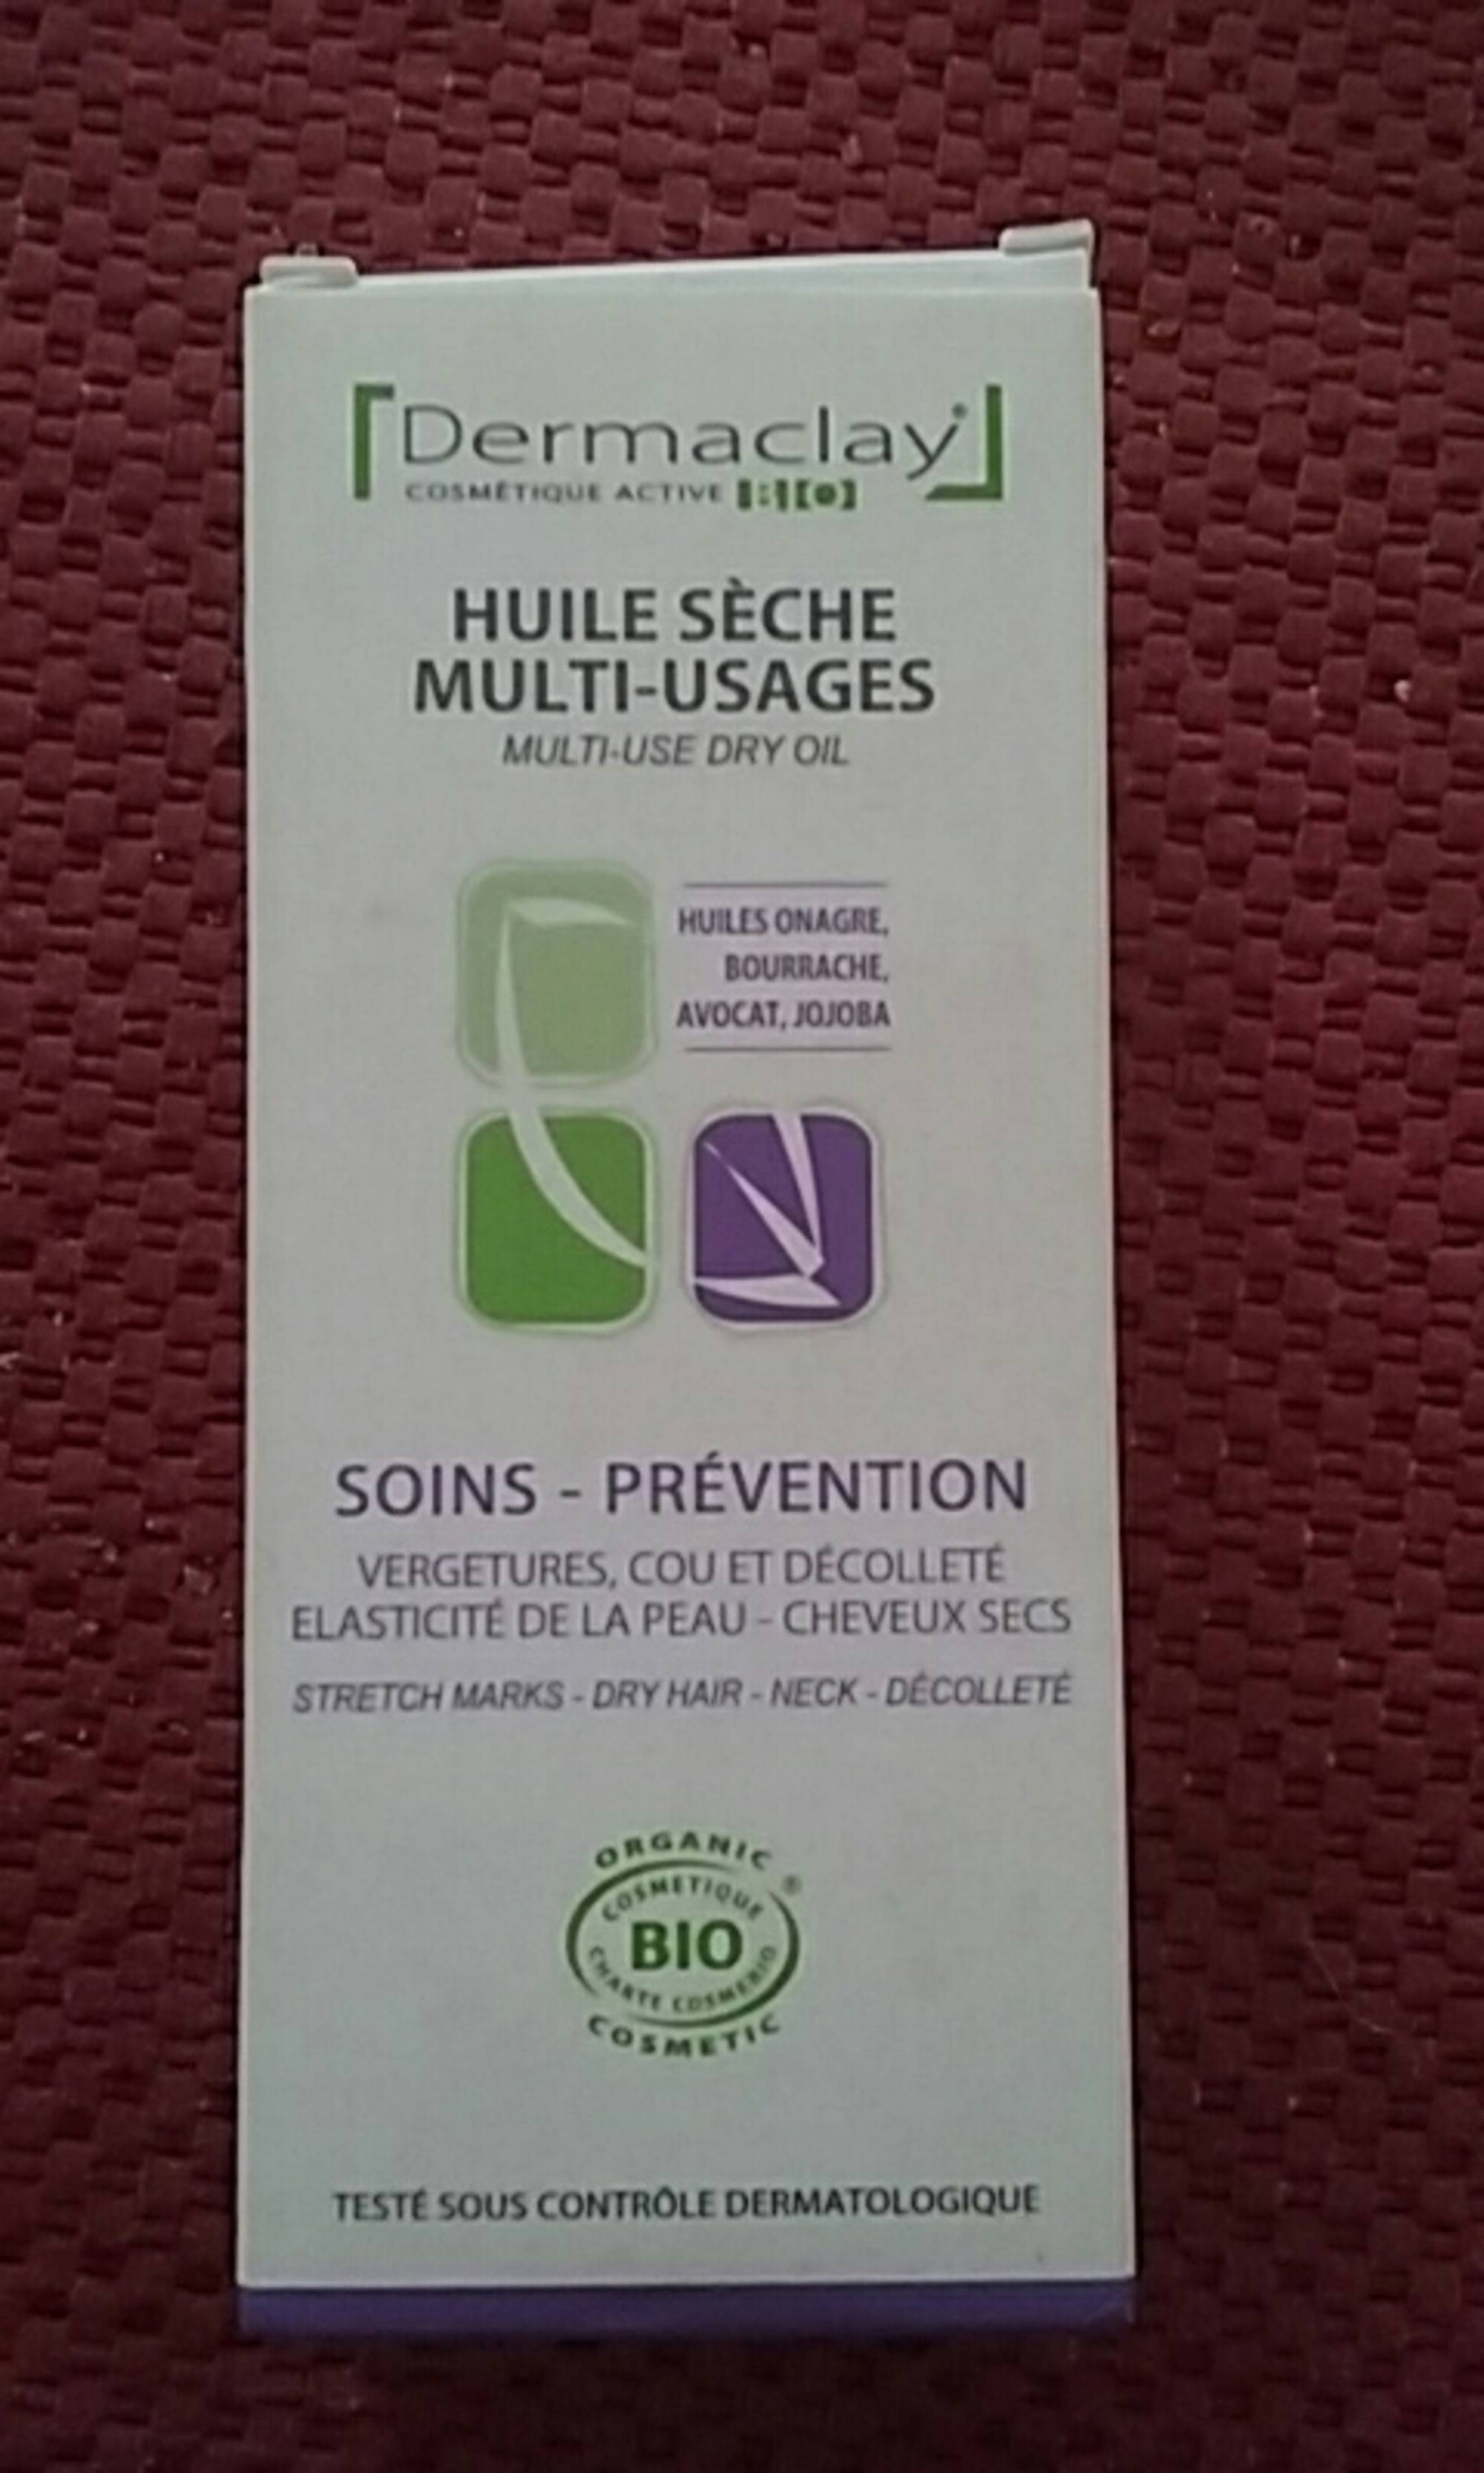 DERMACLAY - Huile sèche multi-usages